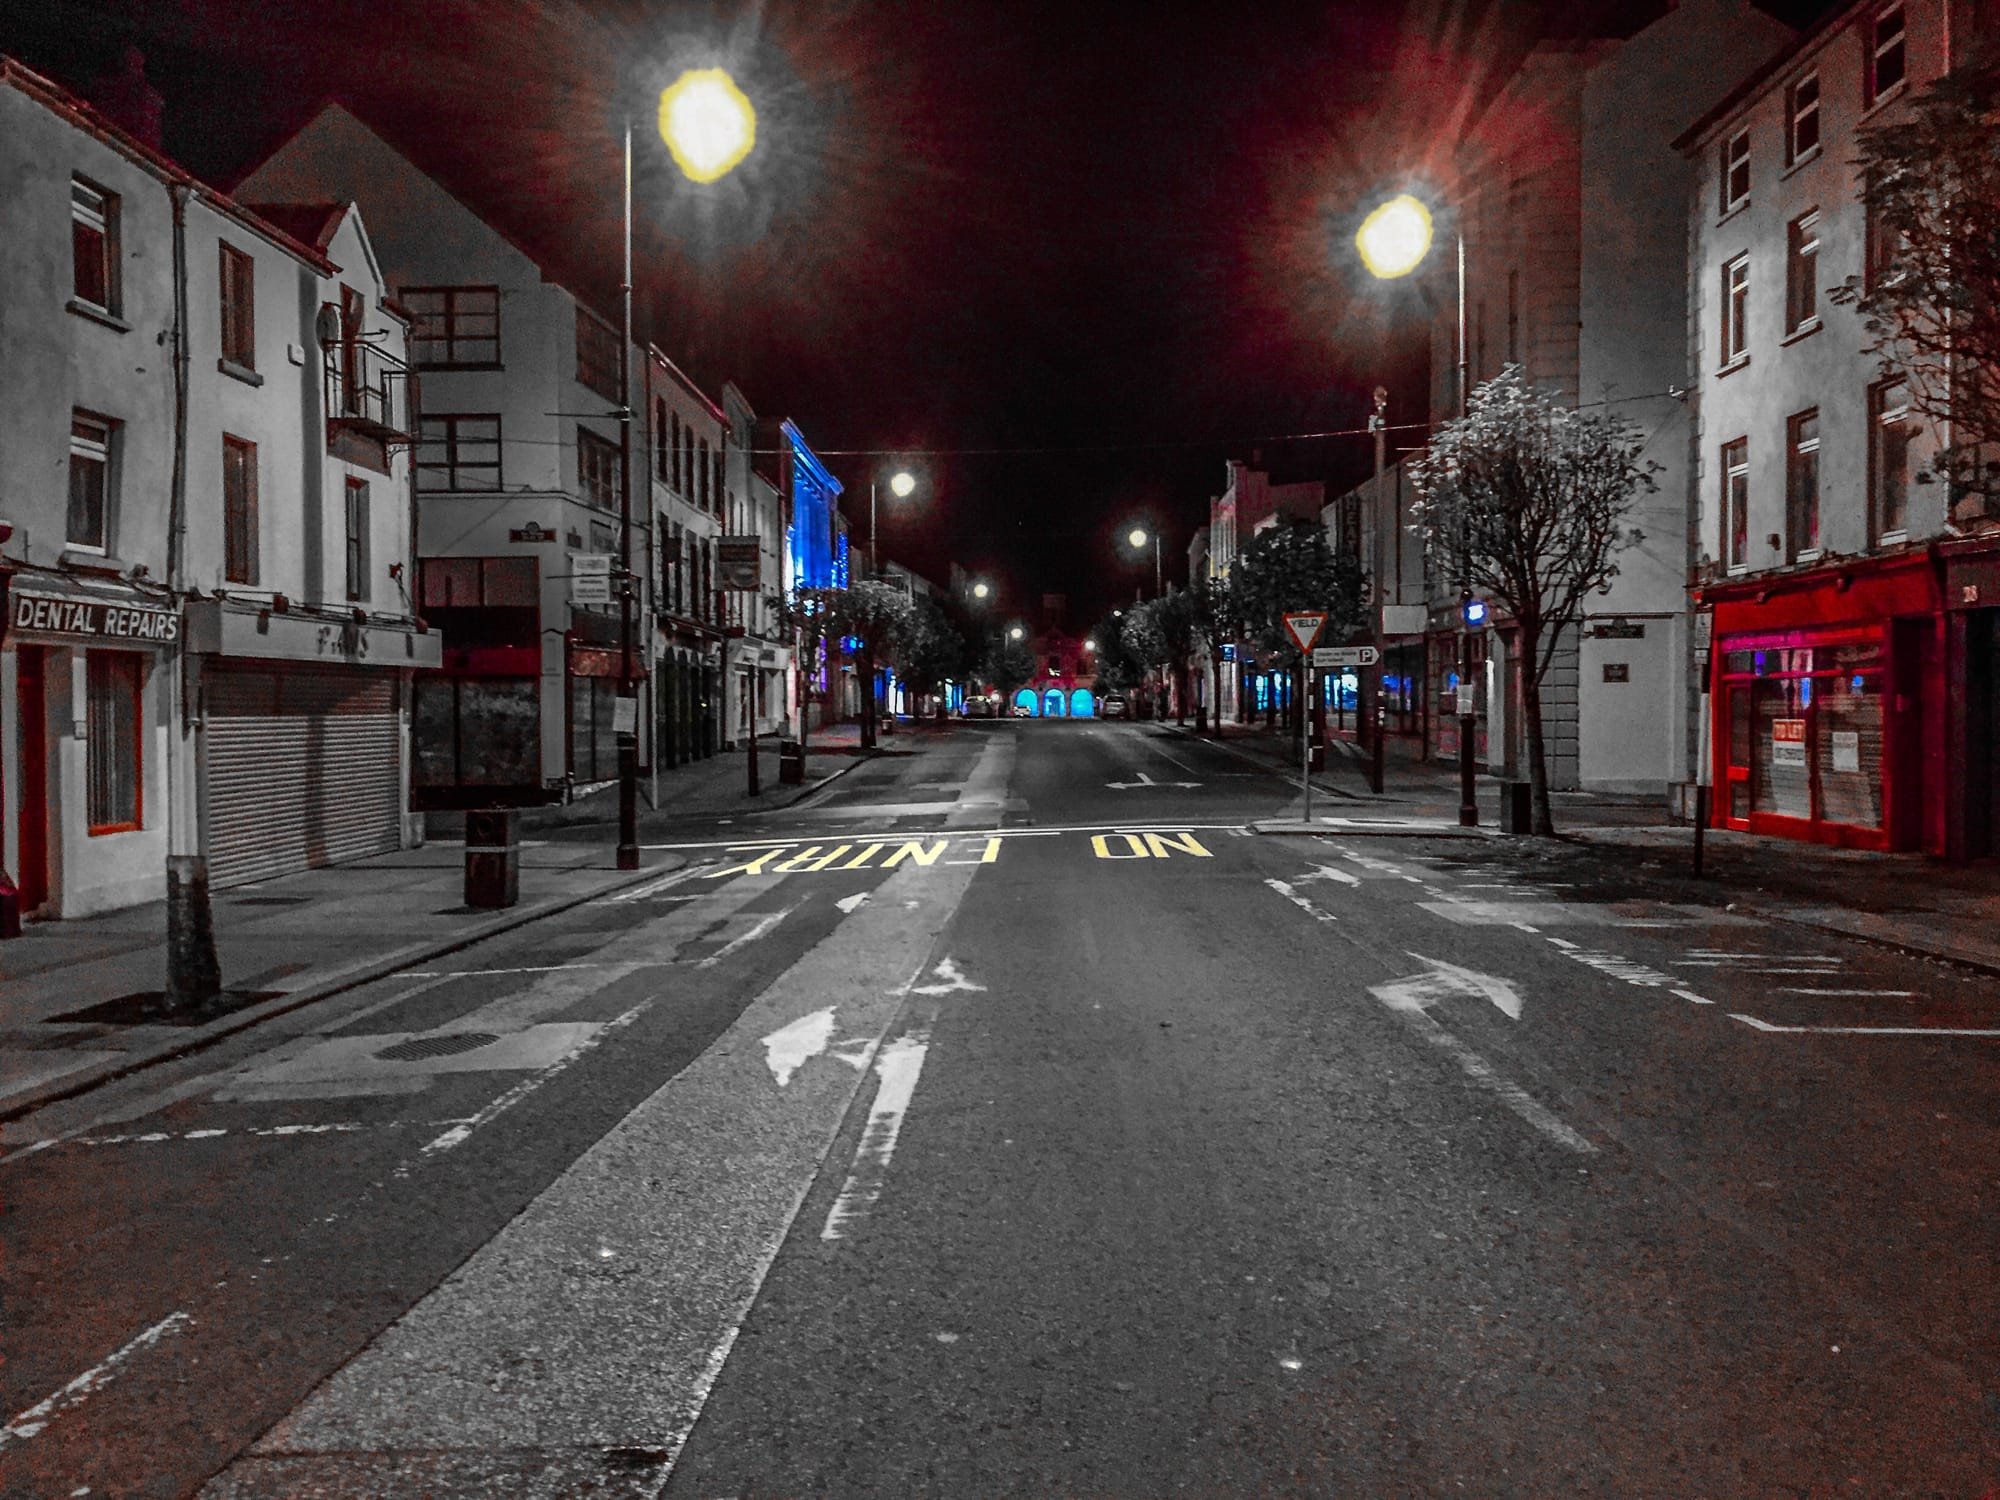 O'Connell St looking towards the Main Guard Clonmel